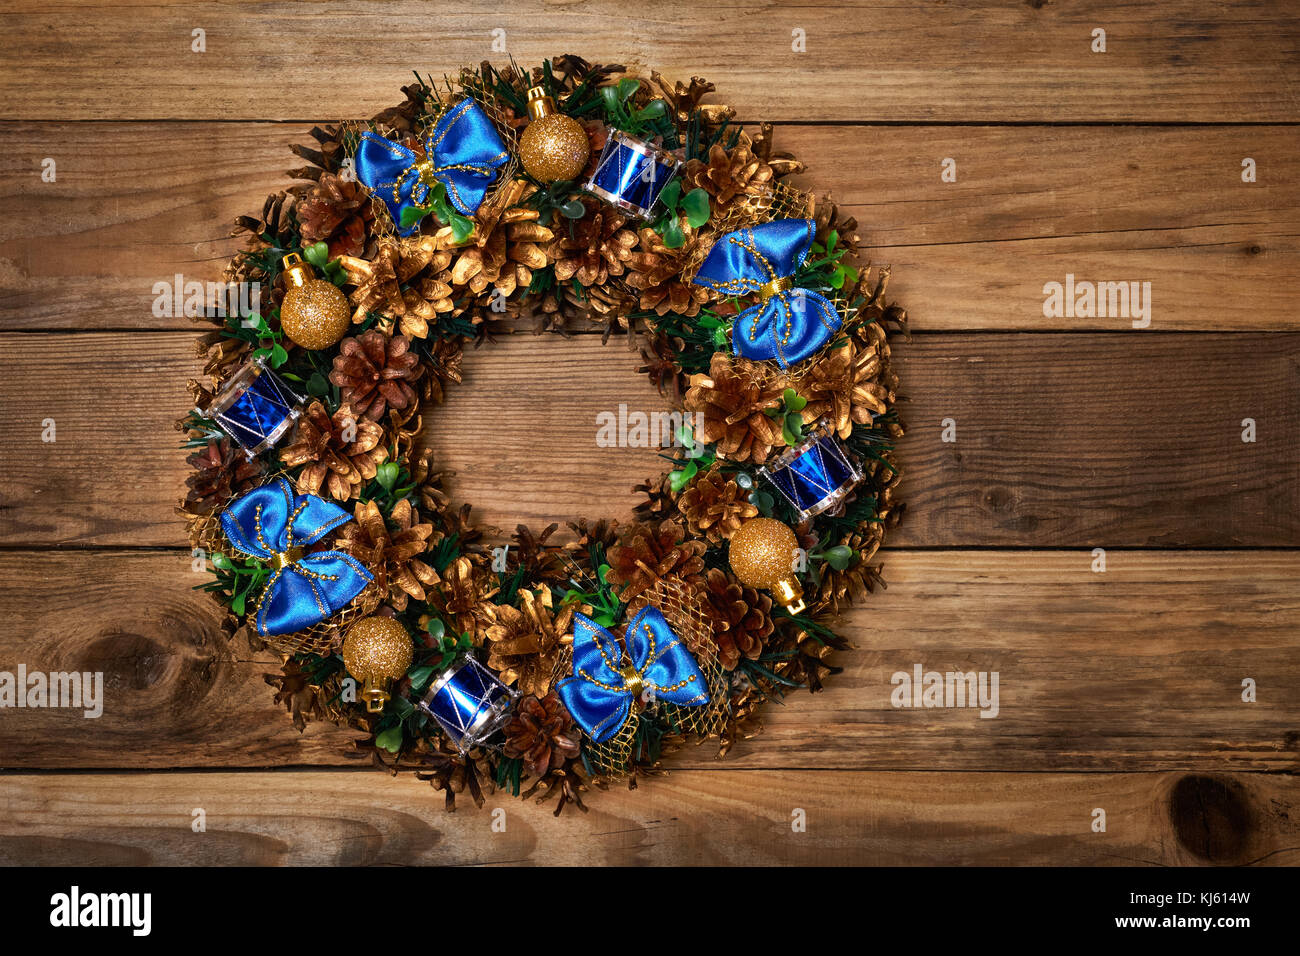 Christmas wreath on old wooden background Stock Photo